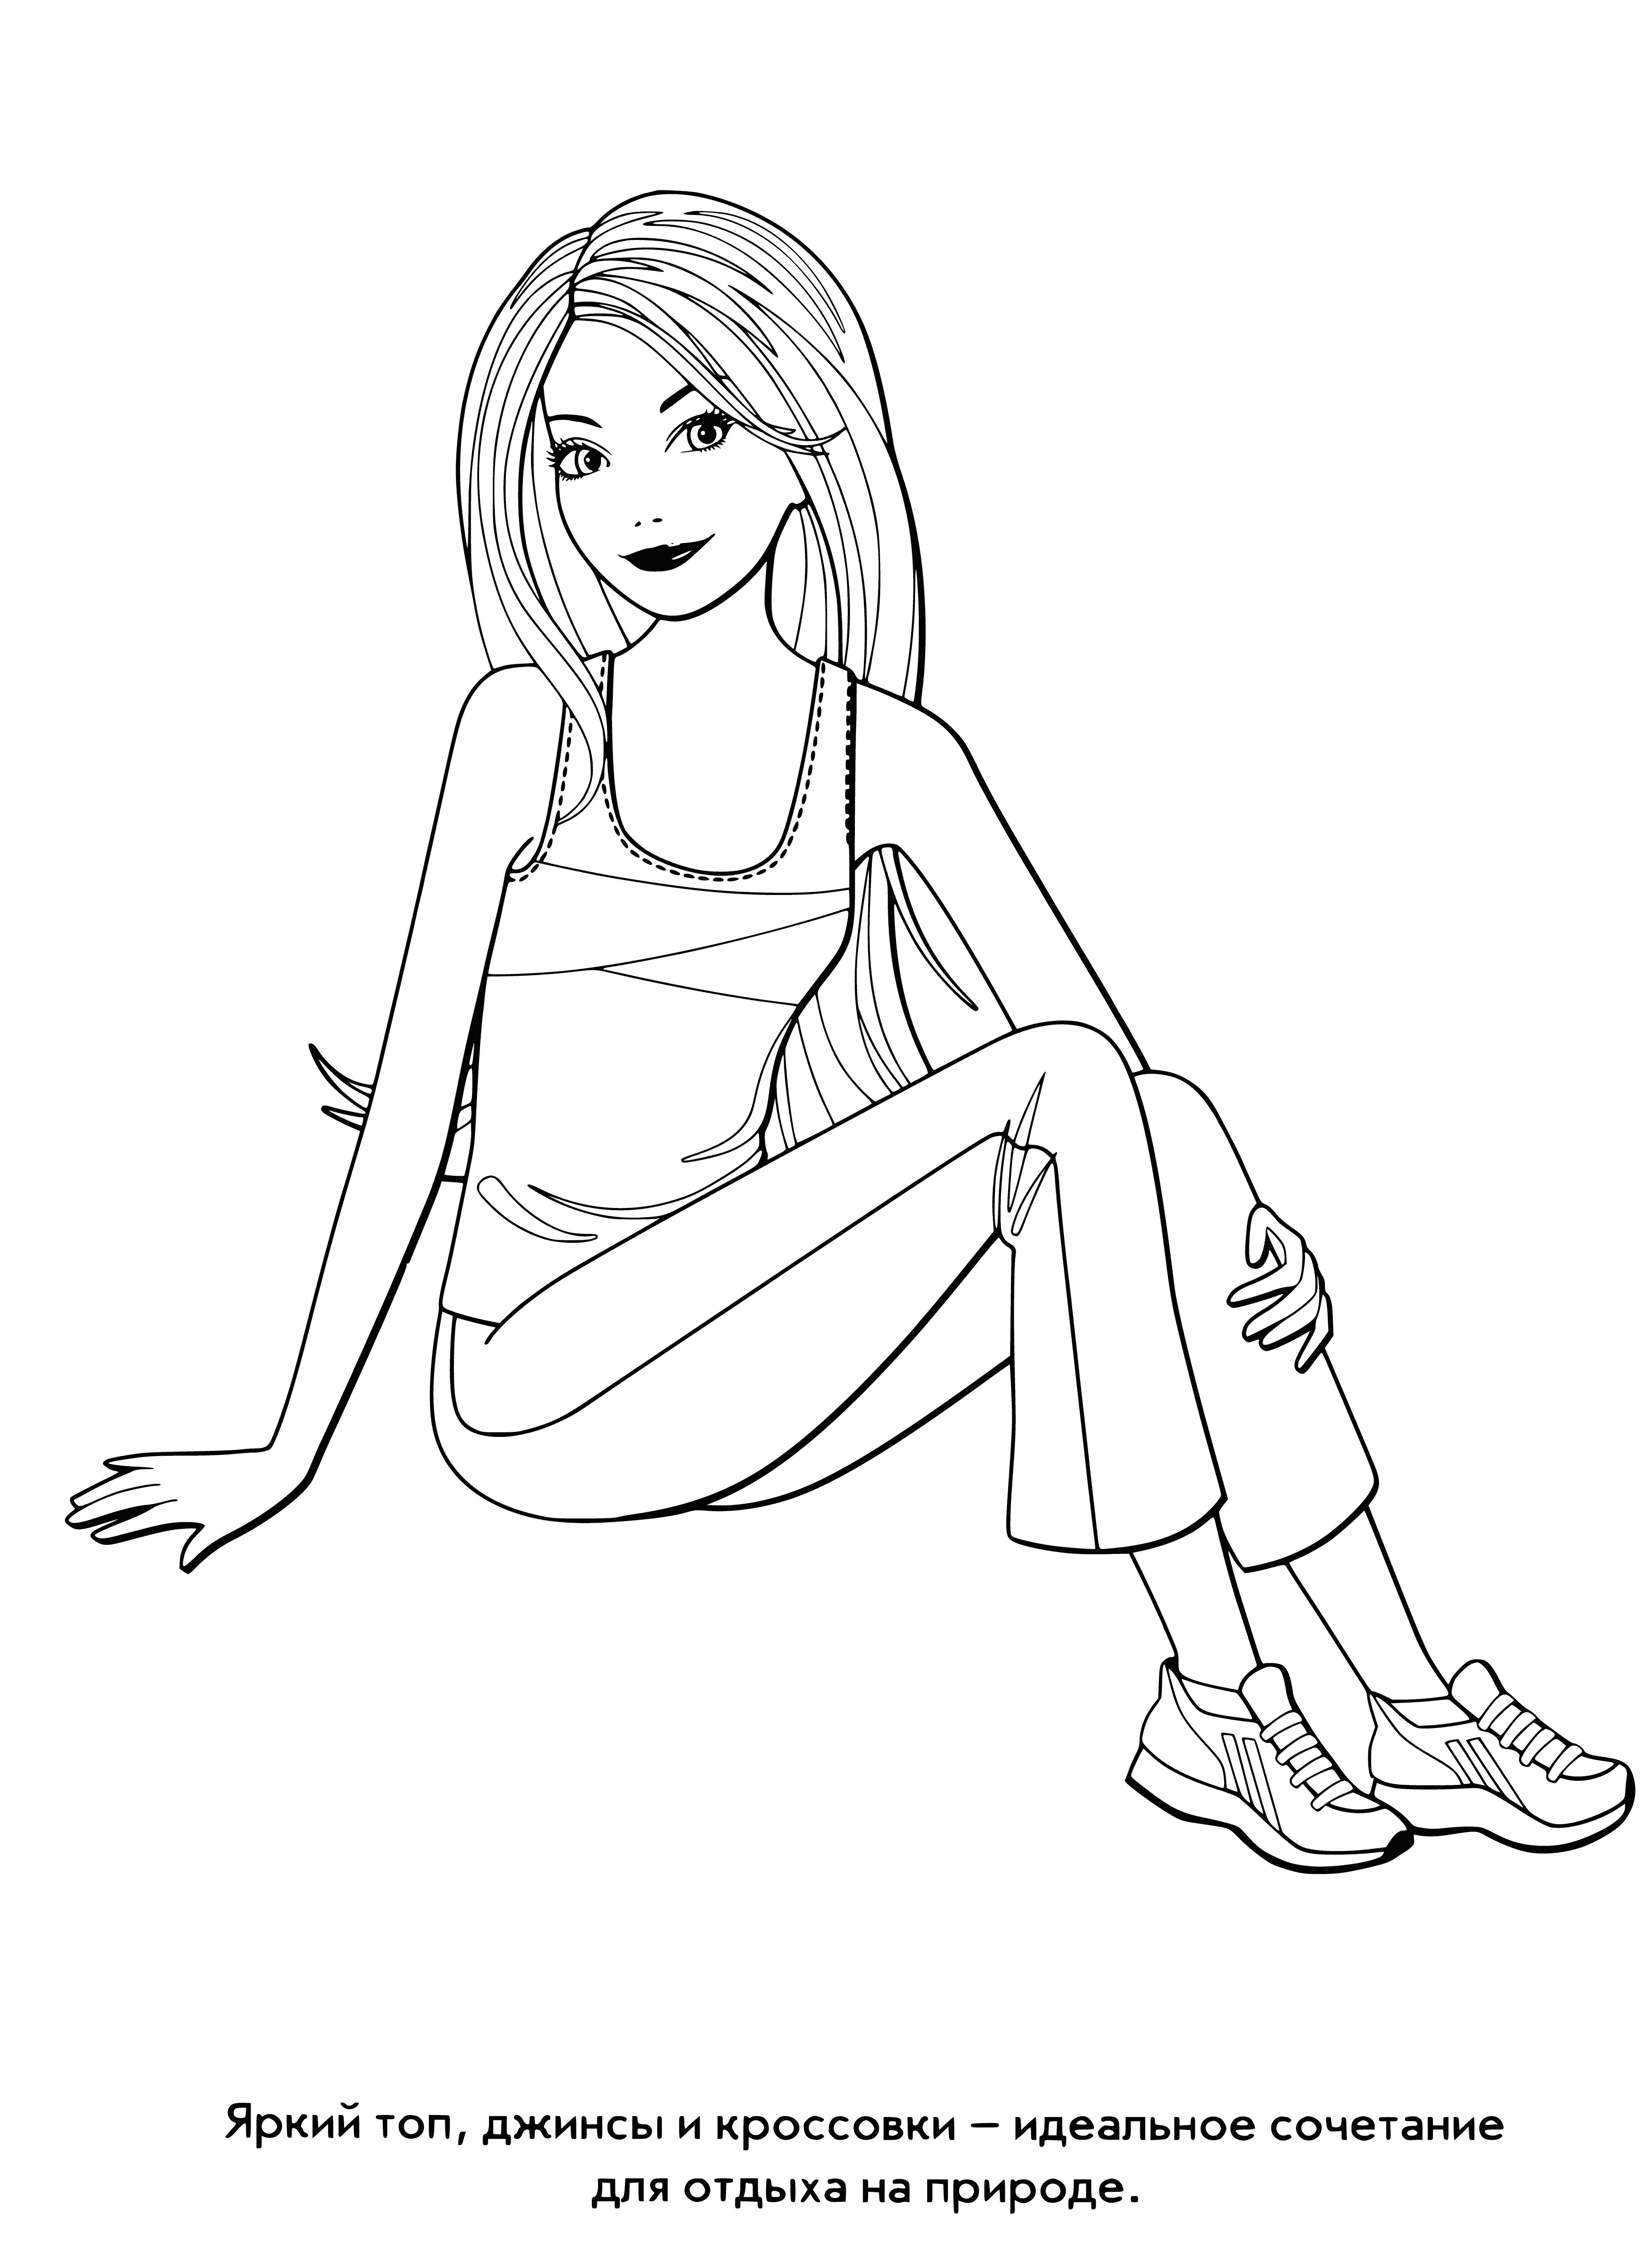 coloring page: Barbie relaxes in a grassy area surrounded by trees and plants, a river in the background. Eyes closed, arm behind her head, peaceful.